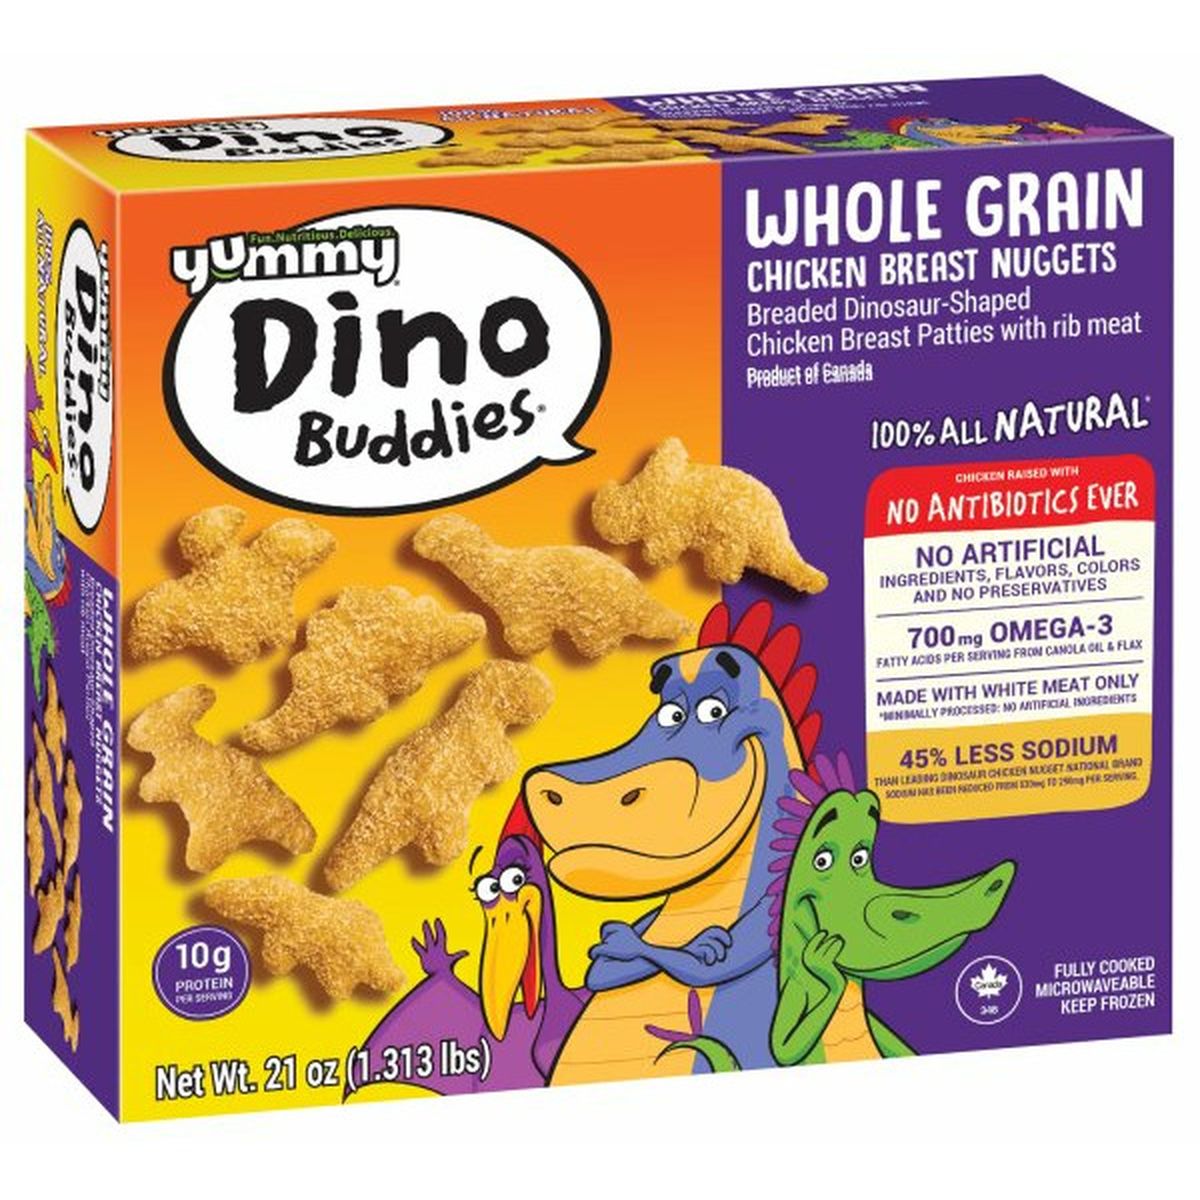 Calories in Yummy Dino Buddies Breaded Dinosaur-Shaped Chicken Breast Nuggets